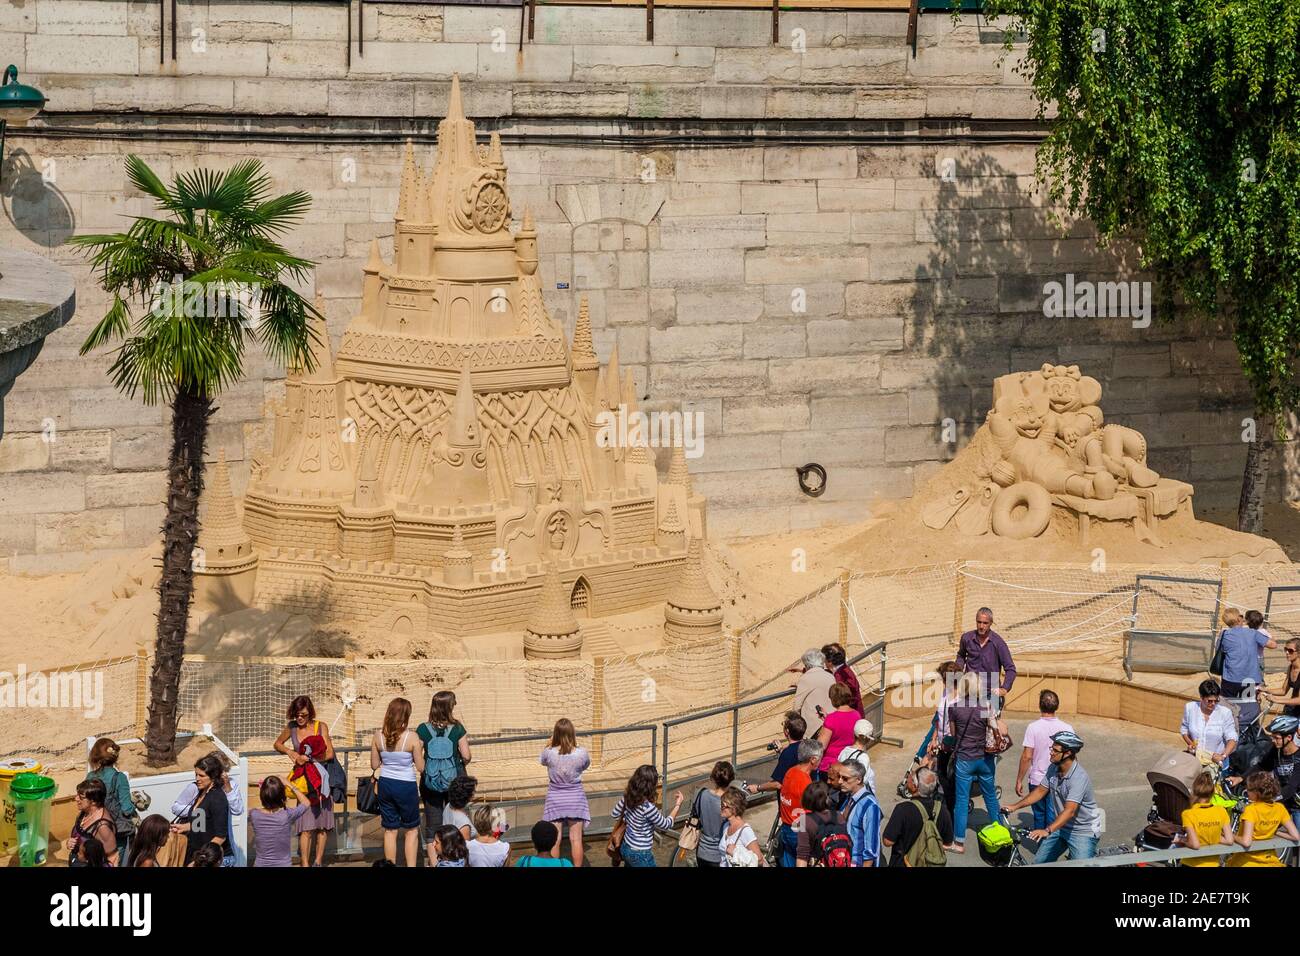 People admiring the huge sand sculpture of a castle with Mickey Mouse and Minnie Mouse at Quai du Louvre during the popular Paris Plage days on a nice... Stock Photo